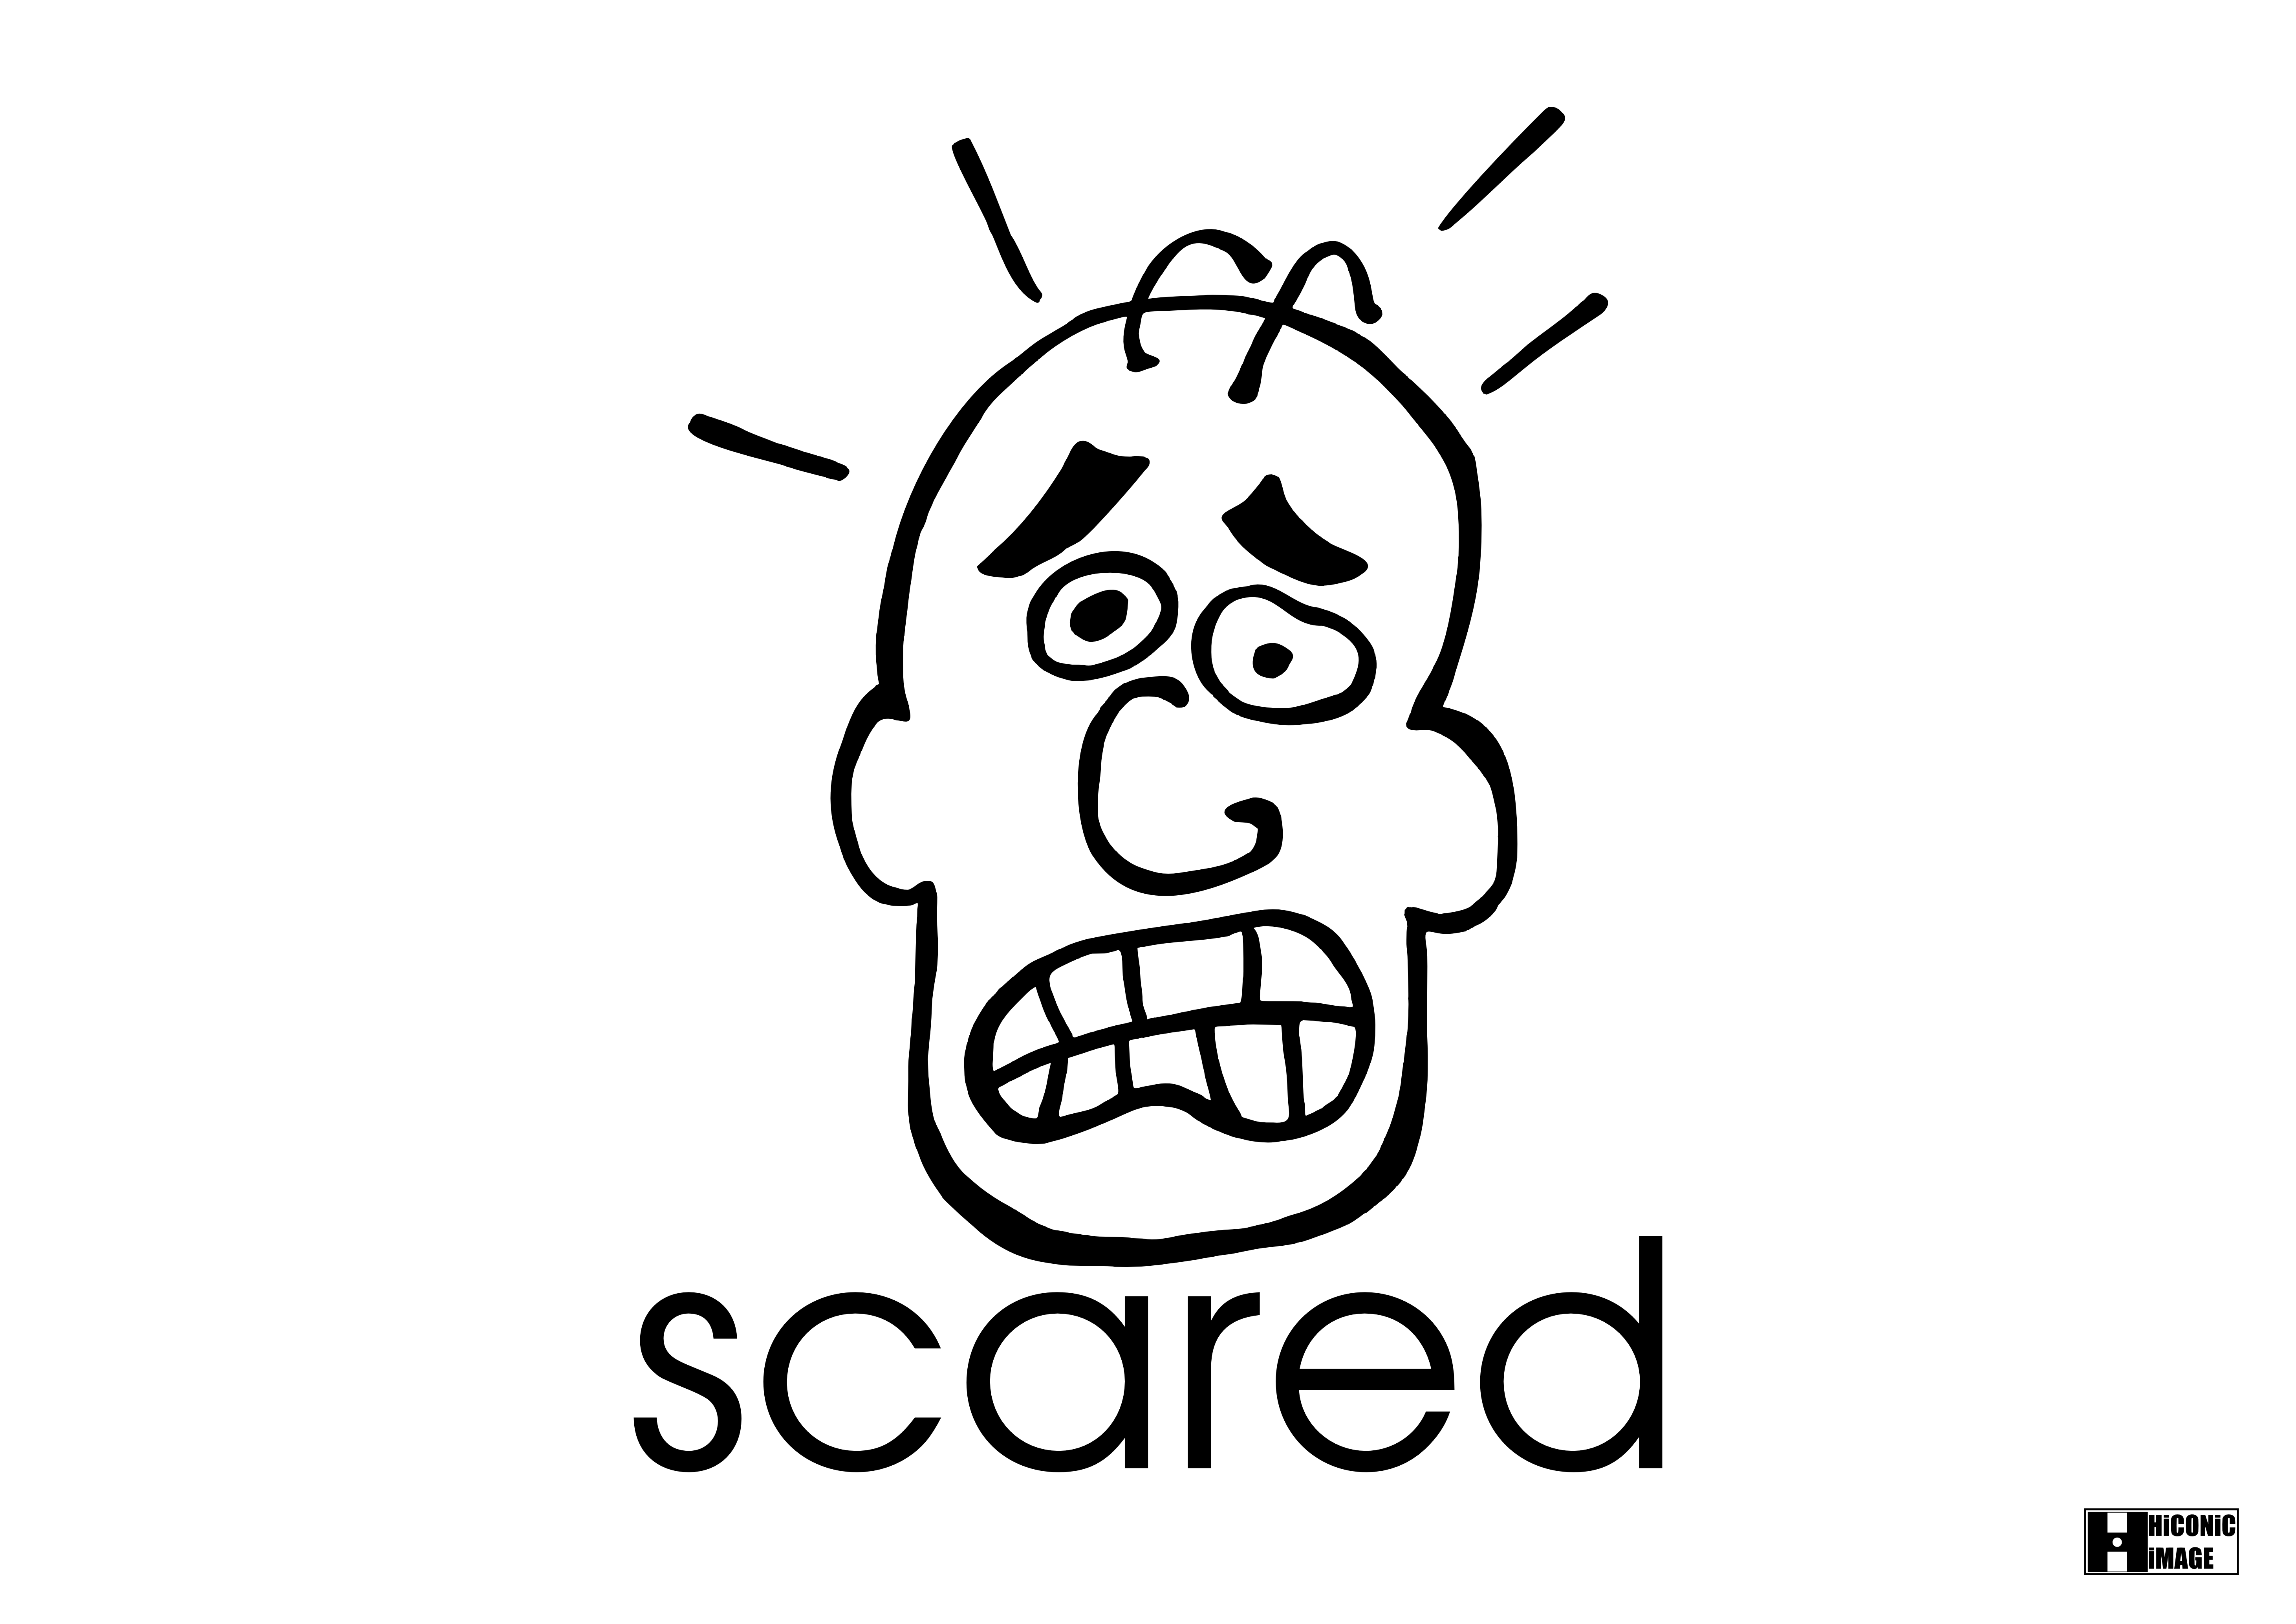 How scared. Scared. Scared картинка. Scared раскраска. Happy Sad Angry scared картинки для детей.